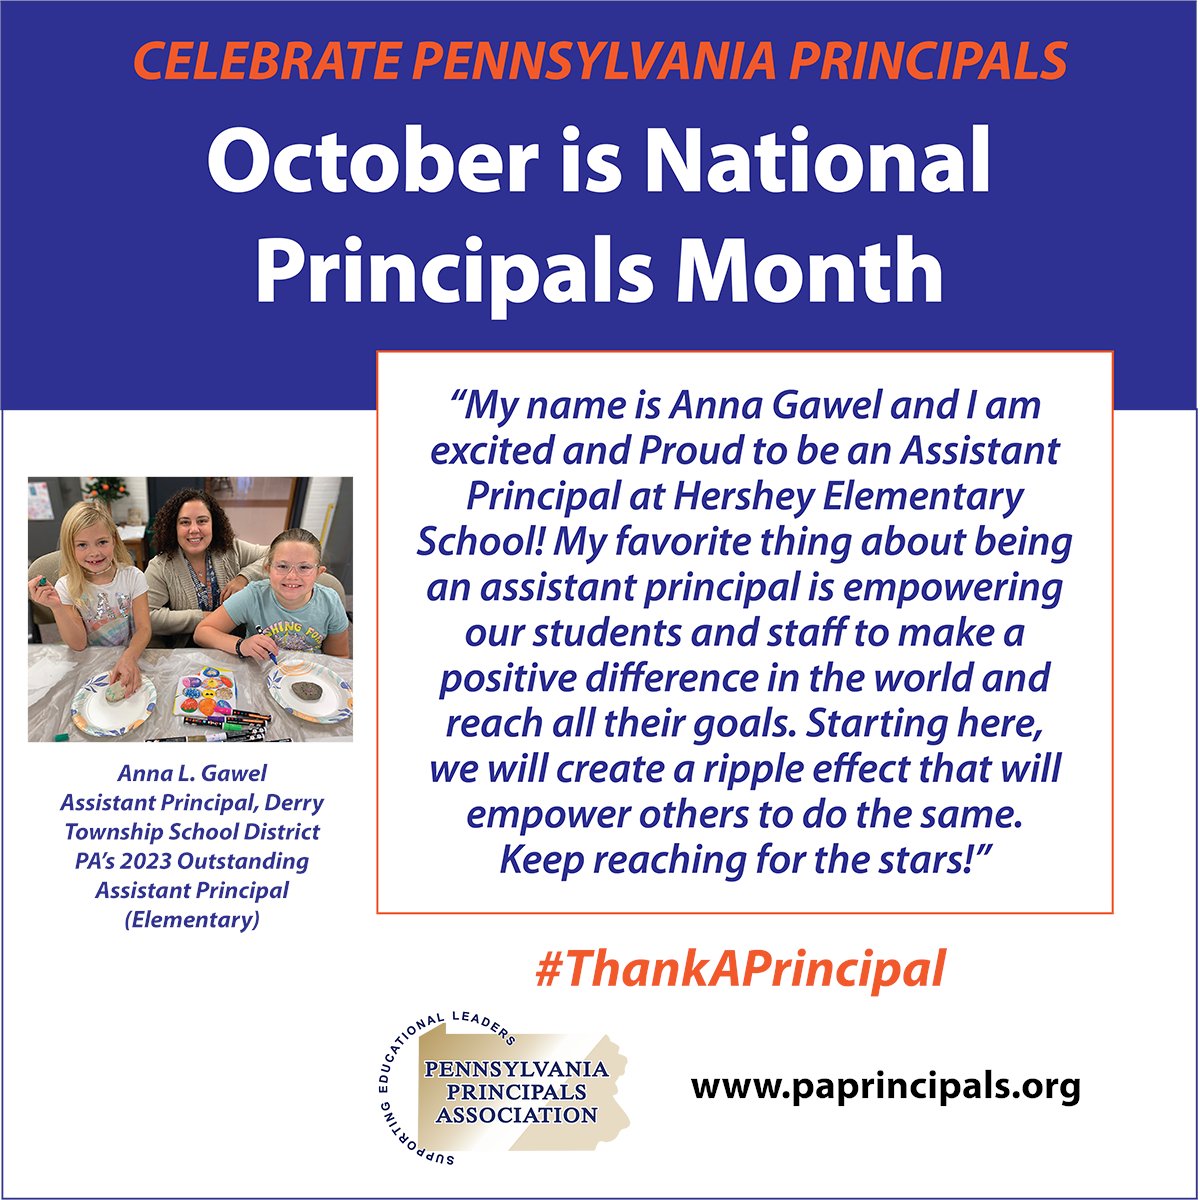 This month, we celebrate and honor our school leaders for their unwavering efforts to foster the well-being and growth of the students and staff under their care. #ThankAPrincipal #PAPRINCIPALS @NAESP @NASSP @DTSDnews @AnnaLGawel